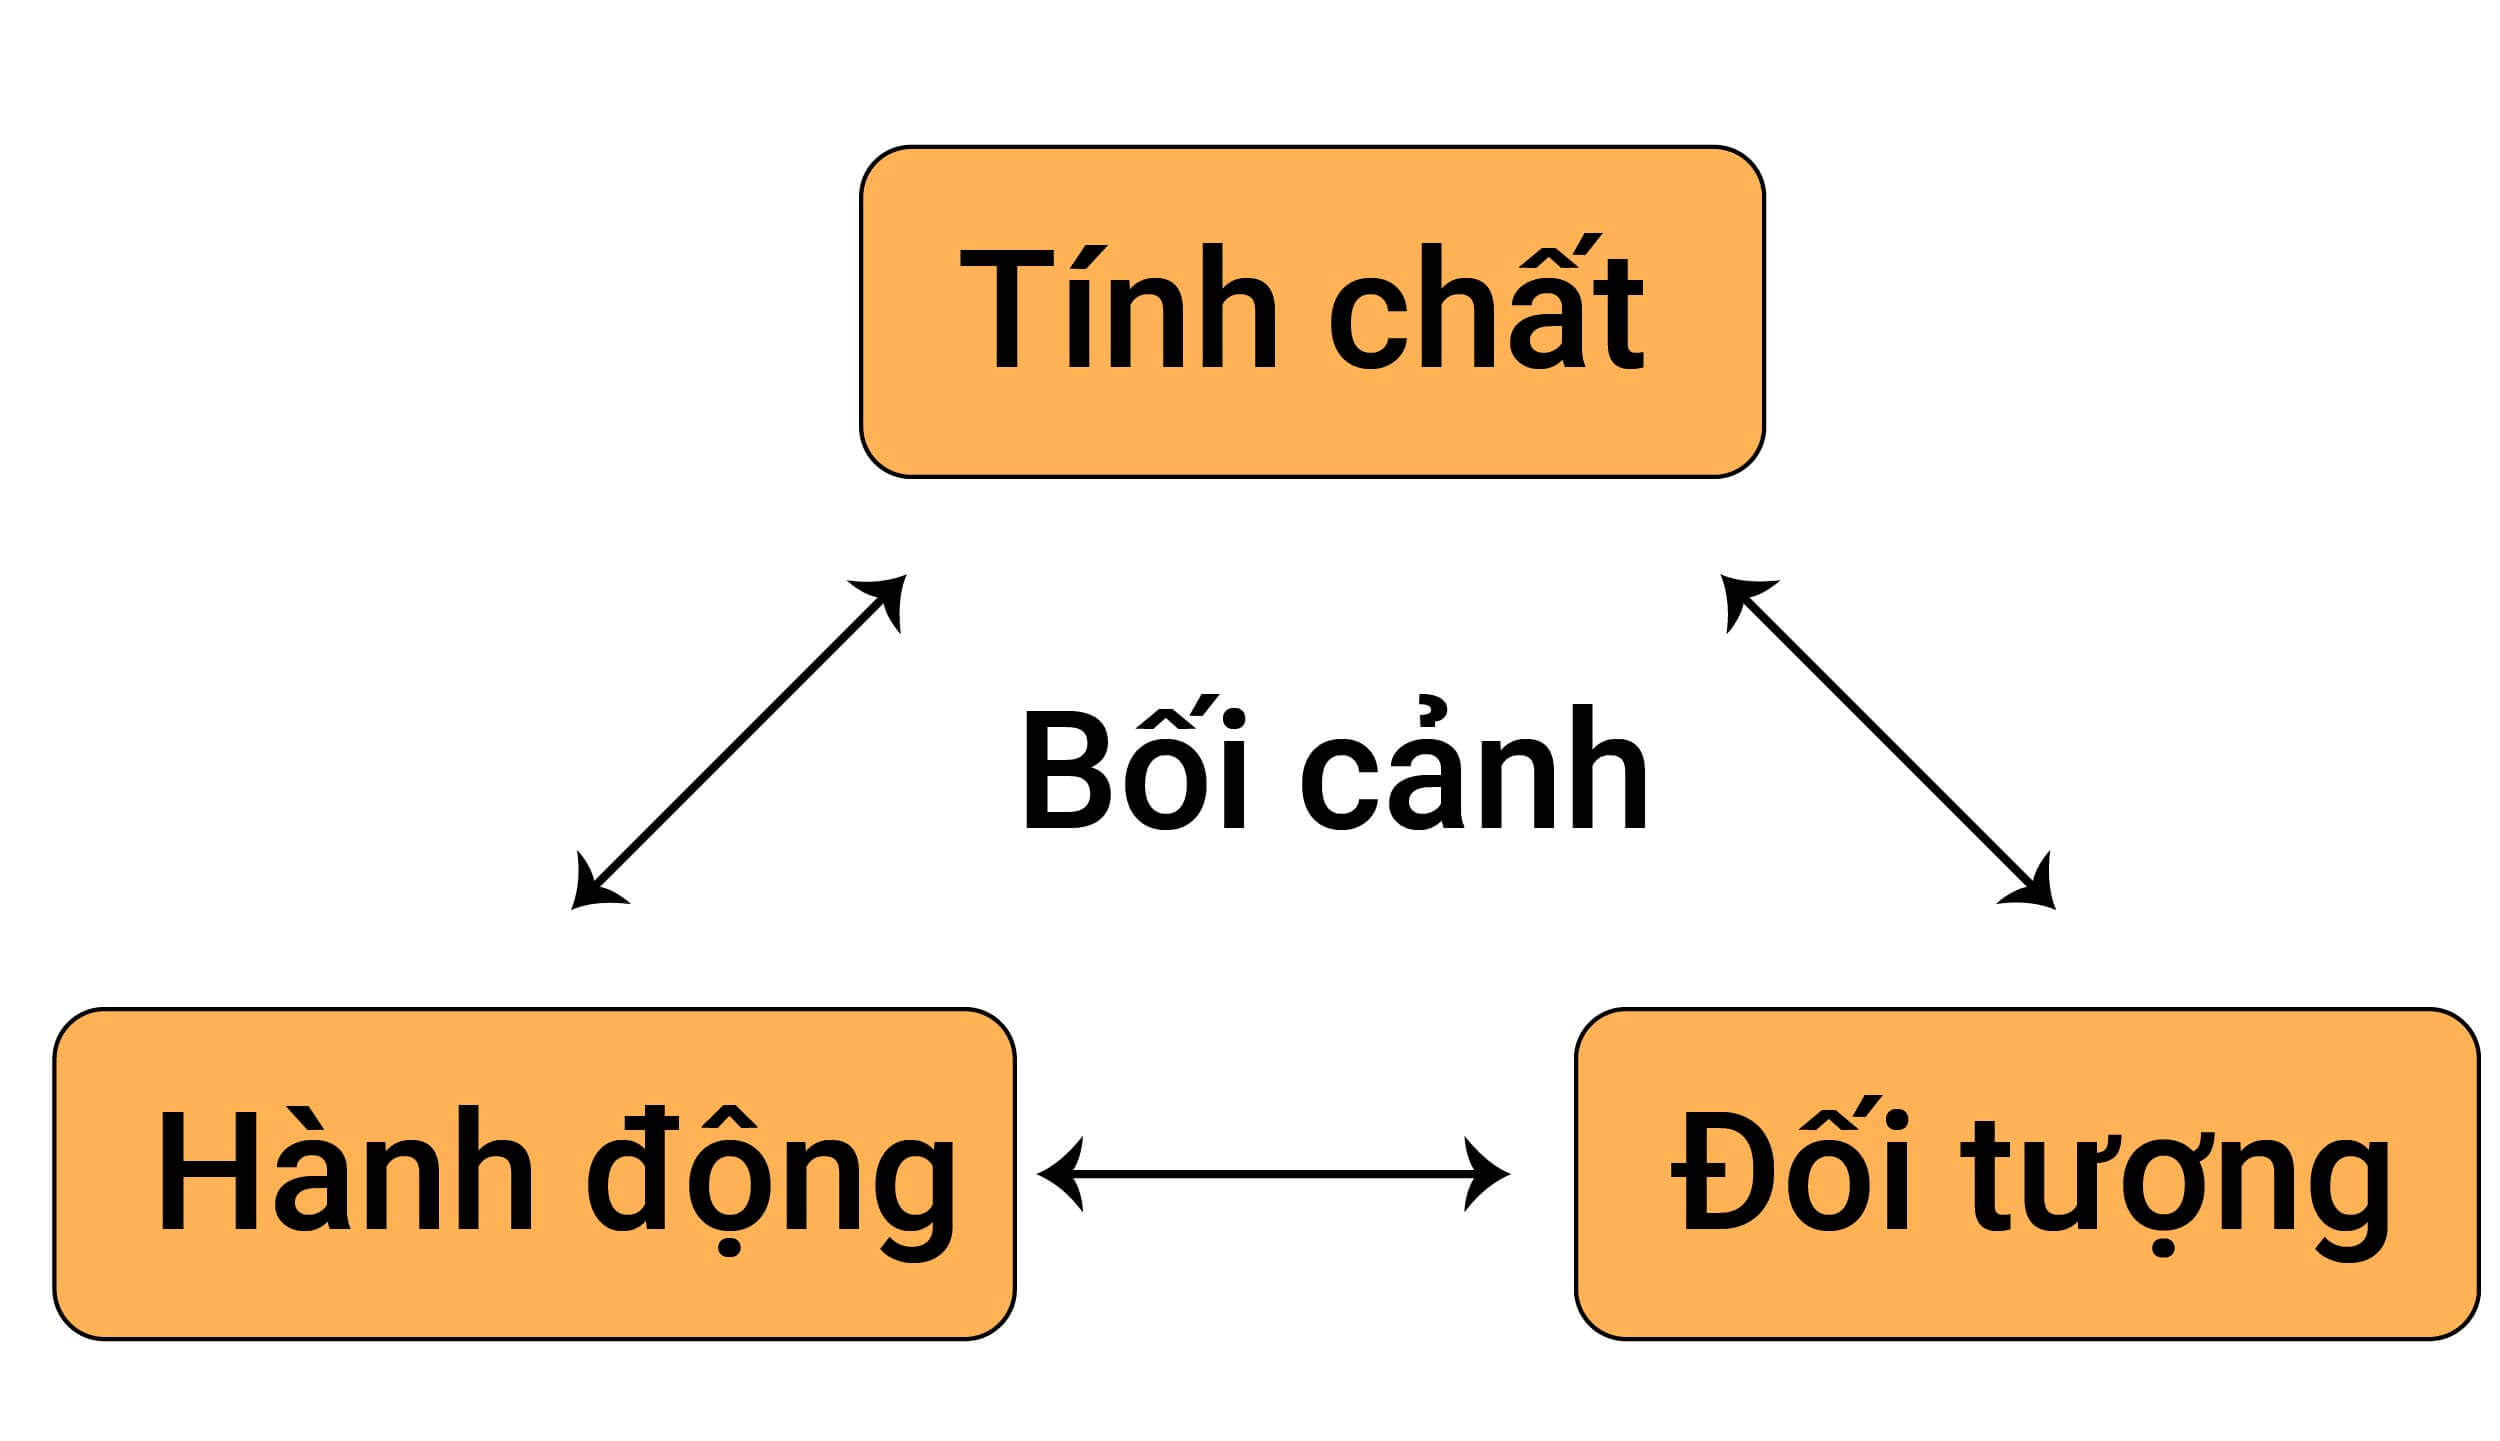 collocations-voi-get-tinh-chat